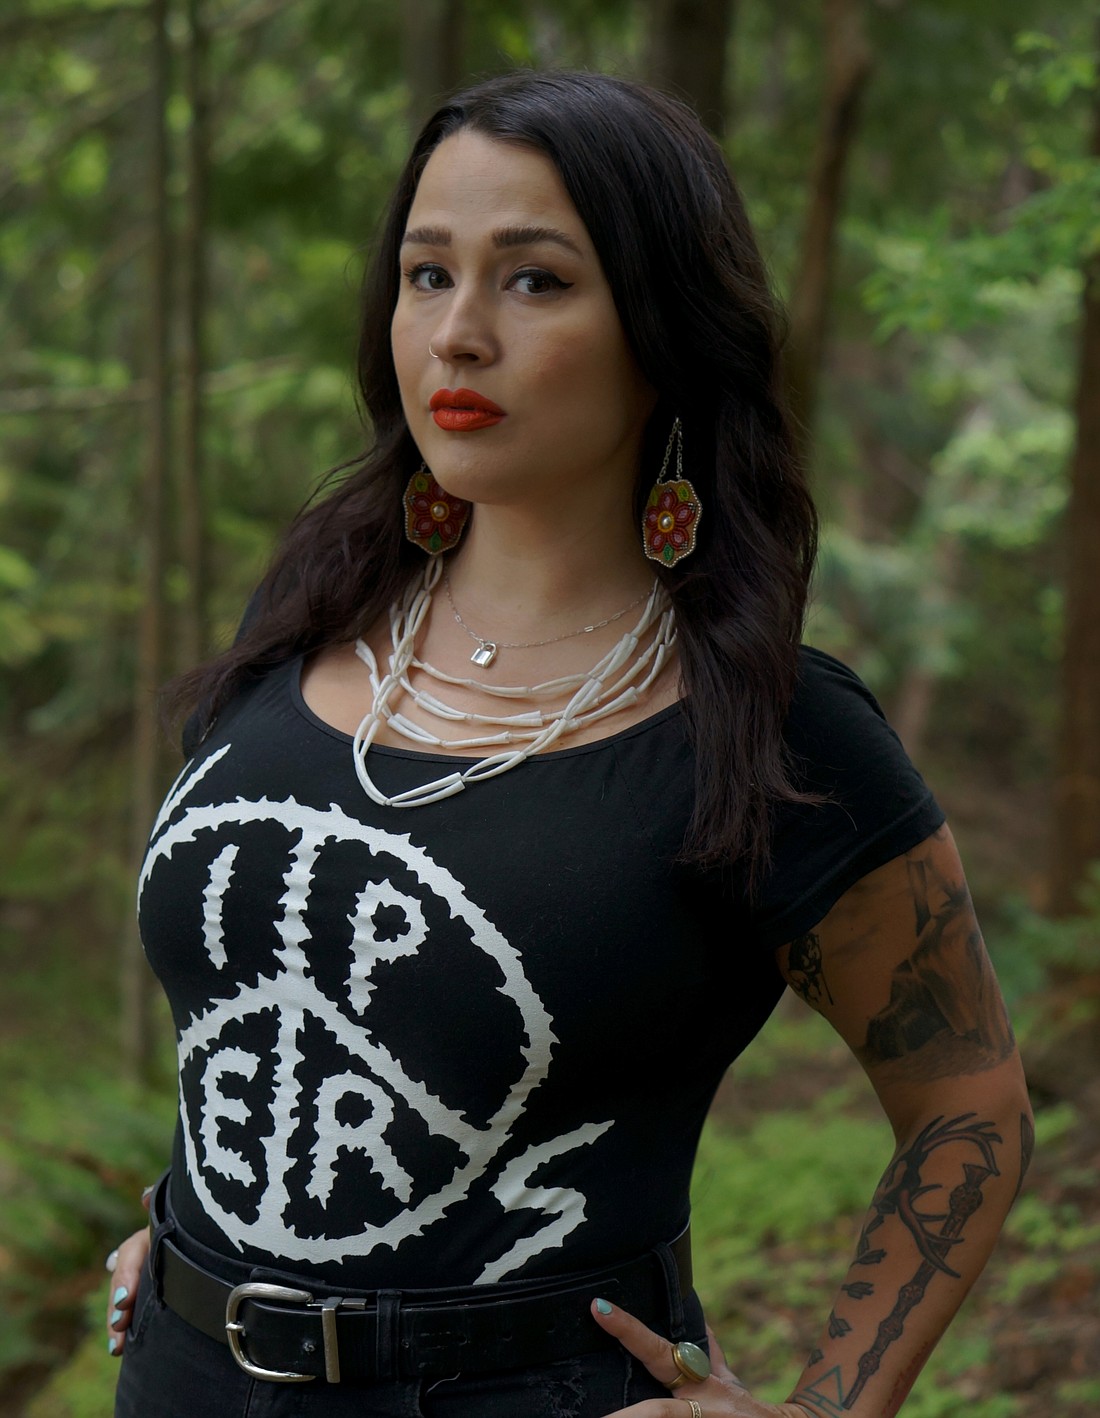 Sasha taqʷšəblu LaPointe, author of “Red Paint: The Ancestral Autobiography of a Coast Salish Punk,” will be the featured author at the Chuckanut Radio Hour Thursday, April 14 at the FireHouse Arts and Events Center.